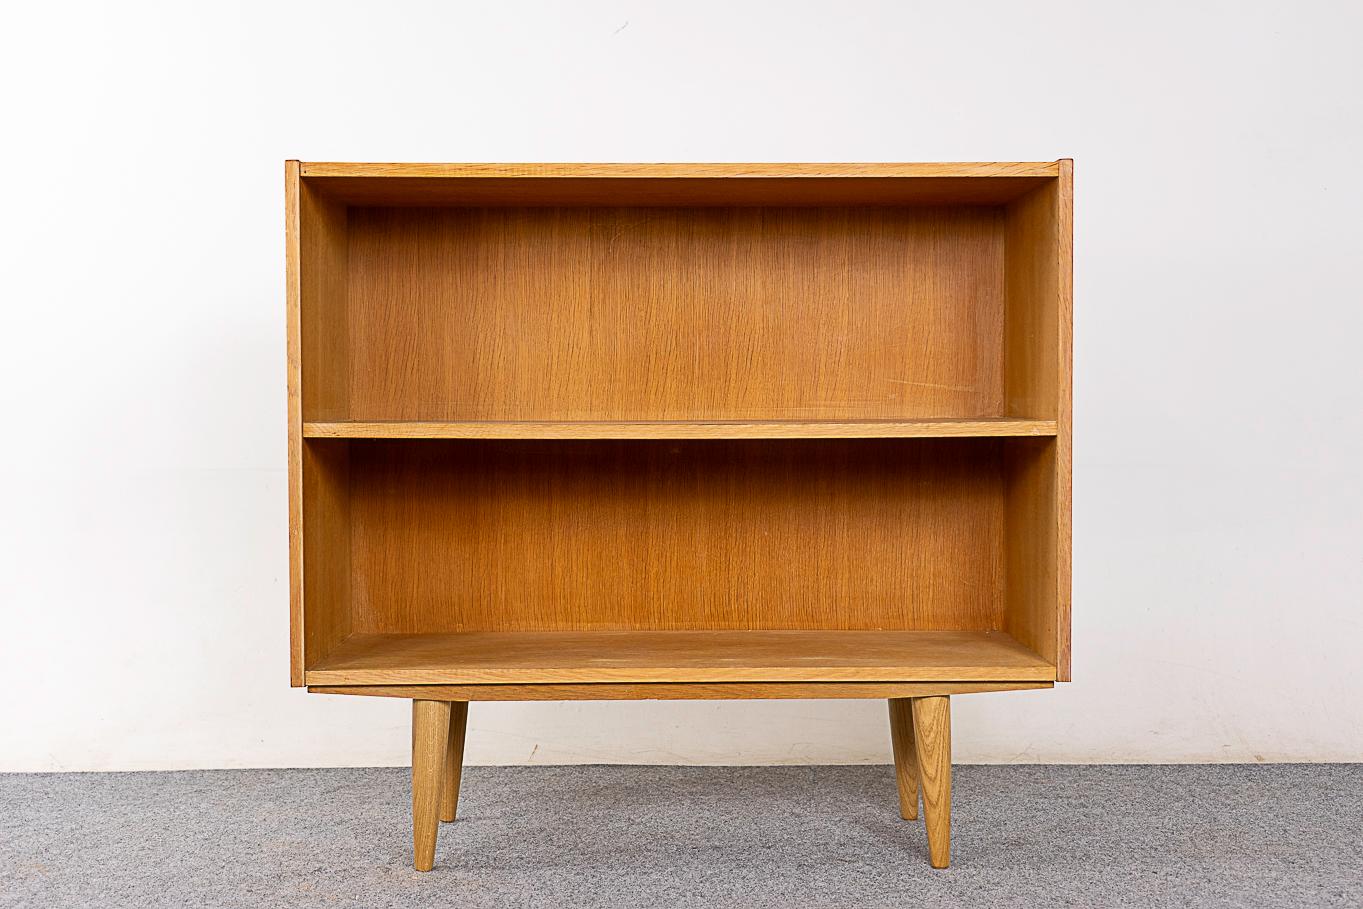 Oak Danish bookcase, circa 1960's. Sleek, low profile lines with fixed height shelf. Bookmatched veneer and solid removable tapered legs . Slim compact size for the modern condo.

Unrestored item with option to purchase in restored condition for an